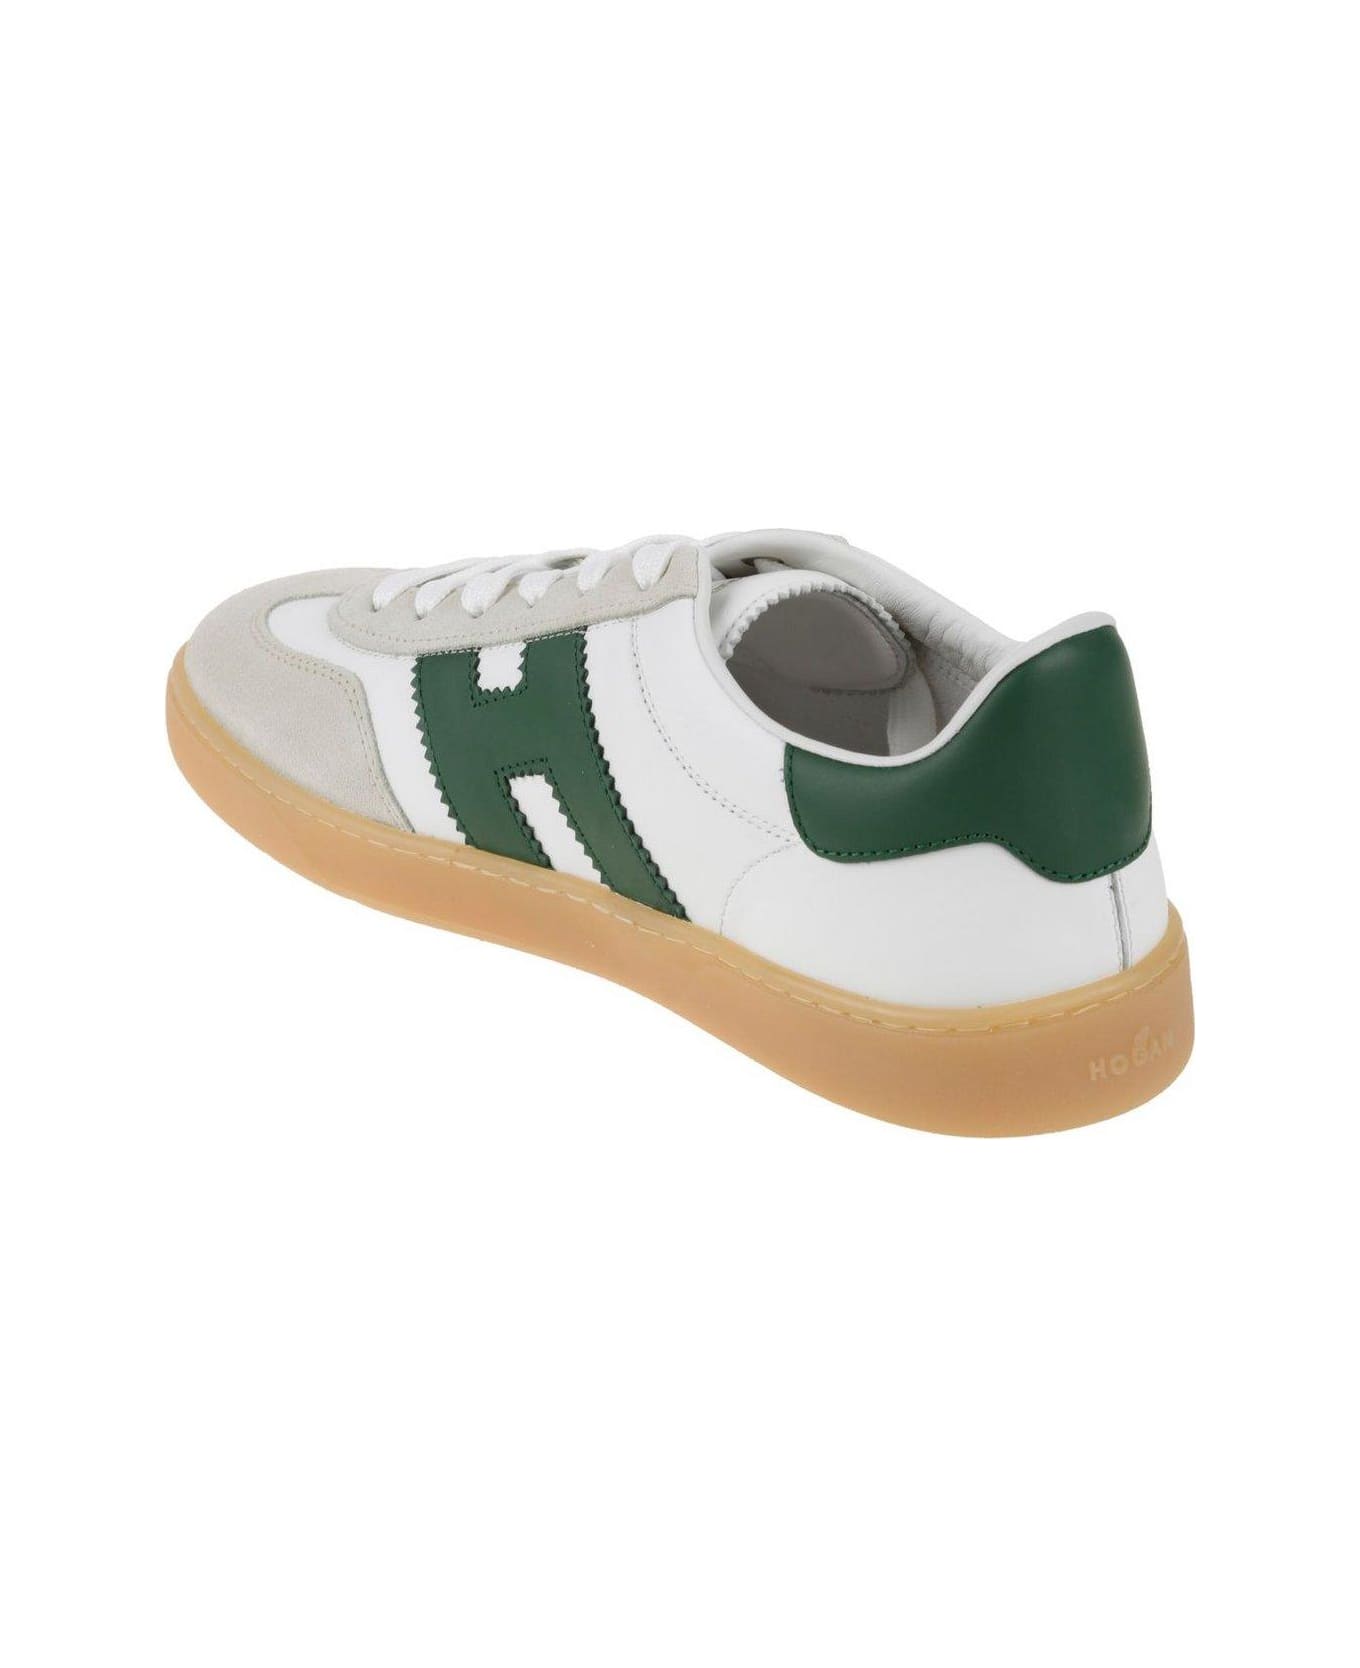 Hogan Cool Side H Patch Sneakers - R Bianco/verde